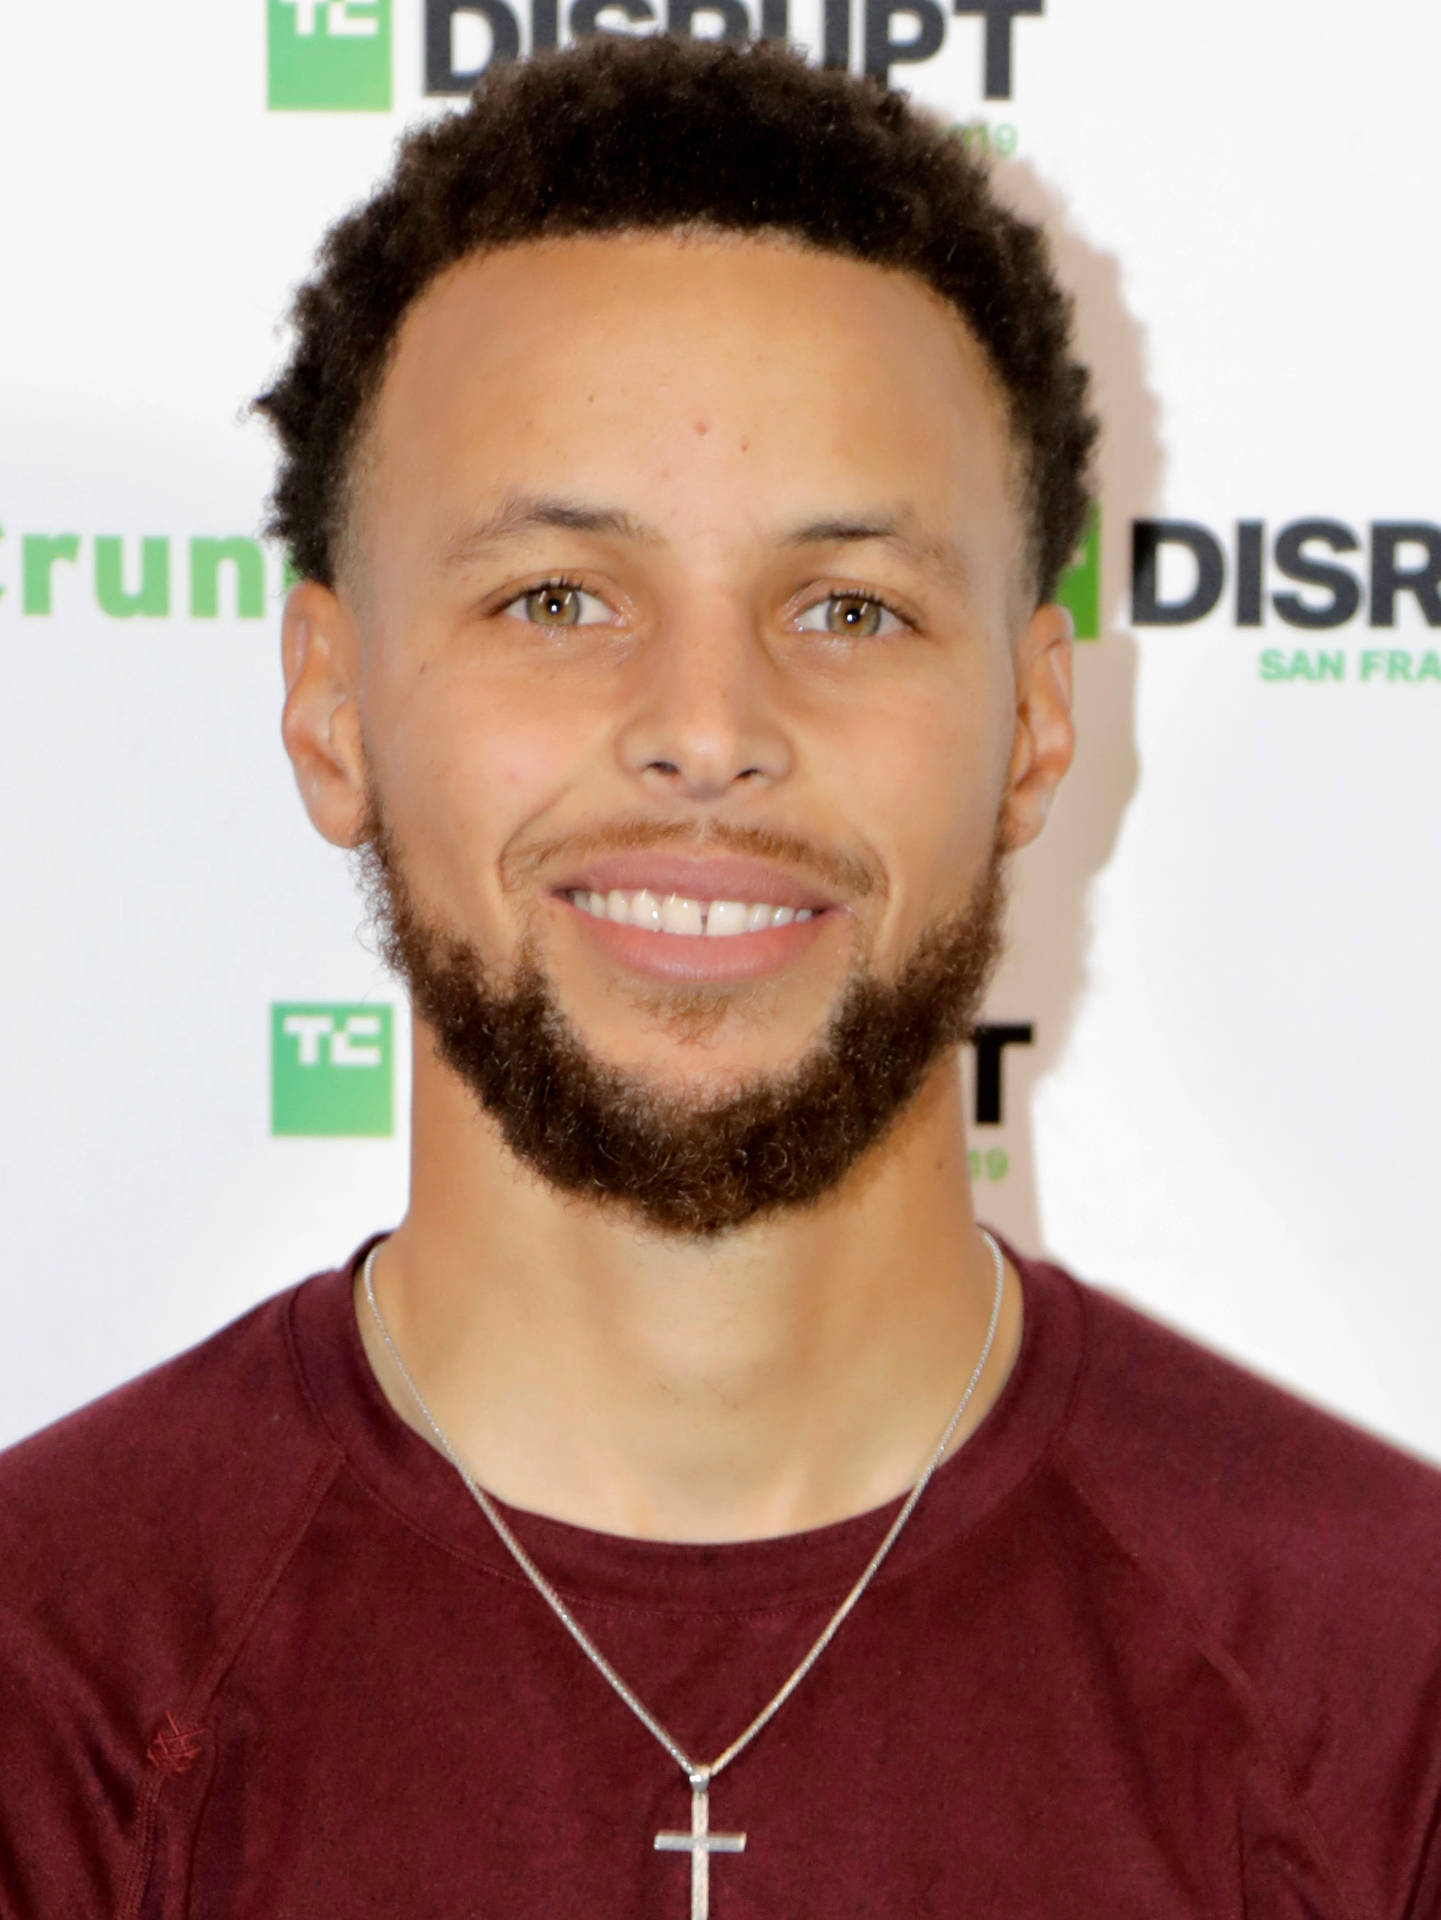 Steph Curry på TechCrunch's Disrupt SF Conference Wallpaper